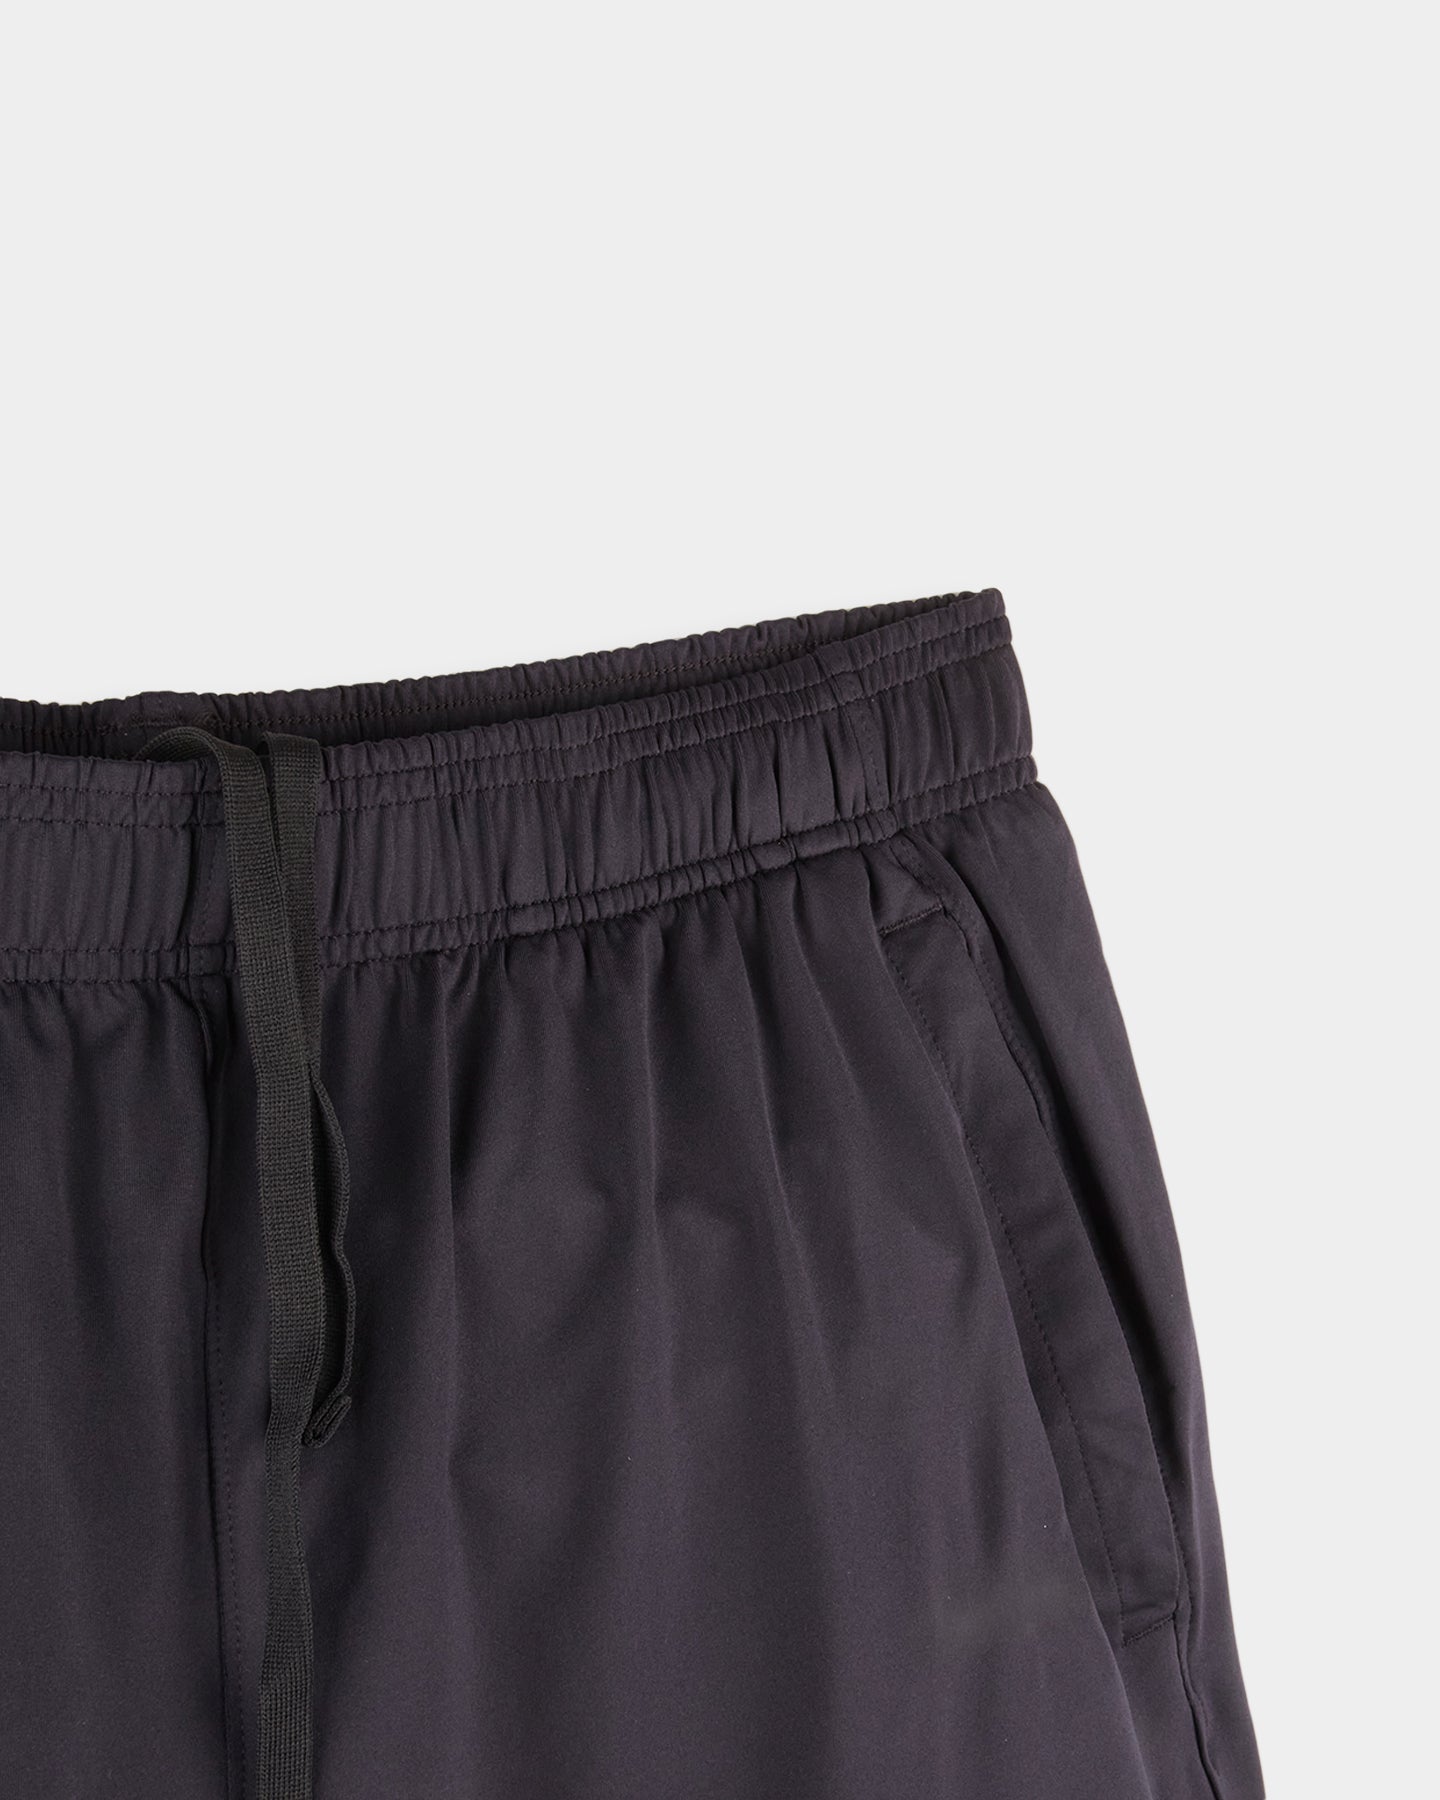 Under Armour Launch 7" 2in1 Short, Black, L A3